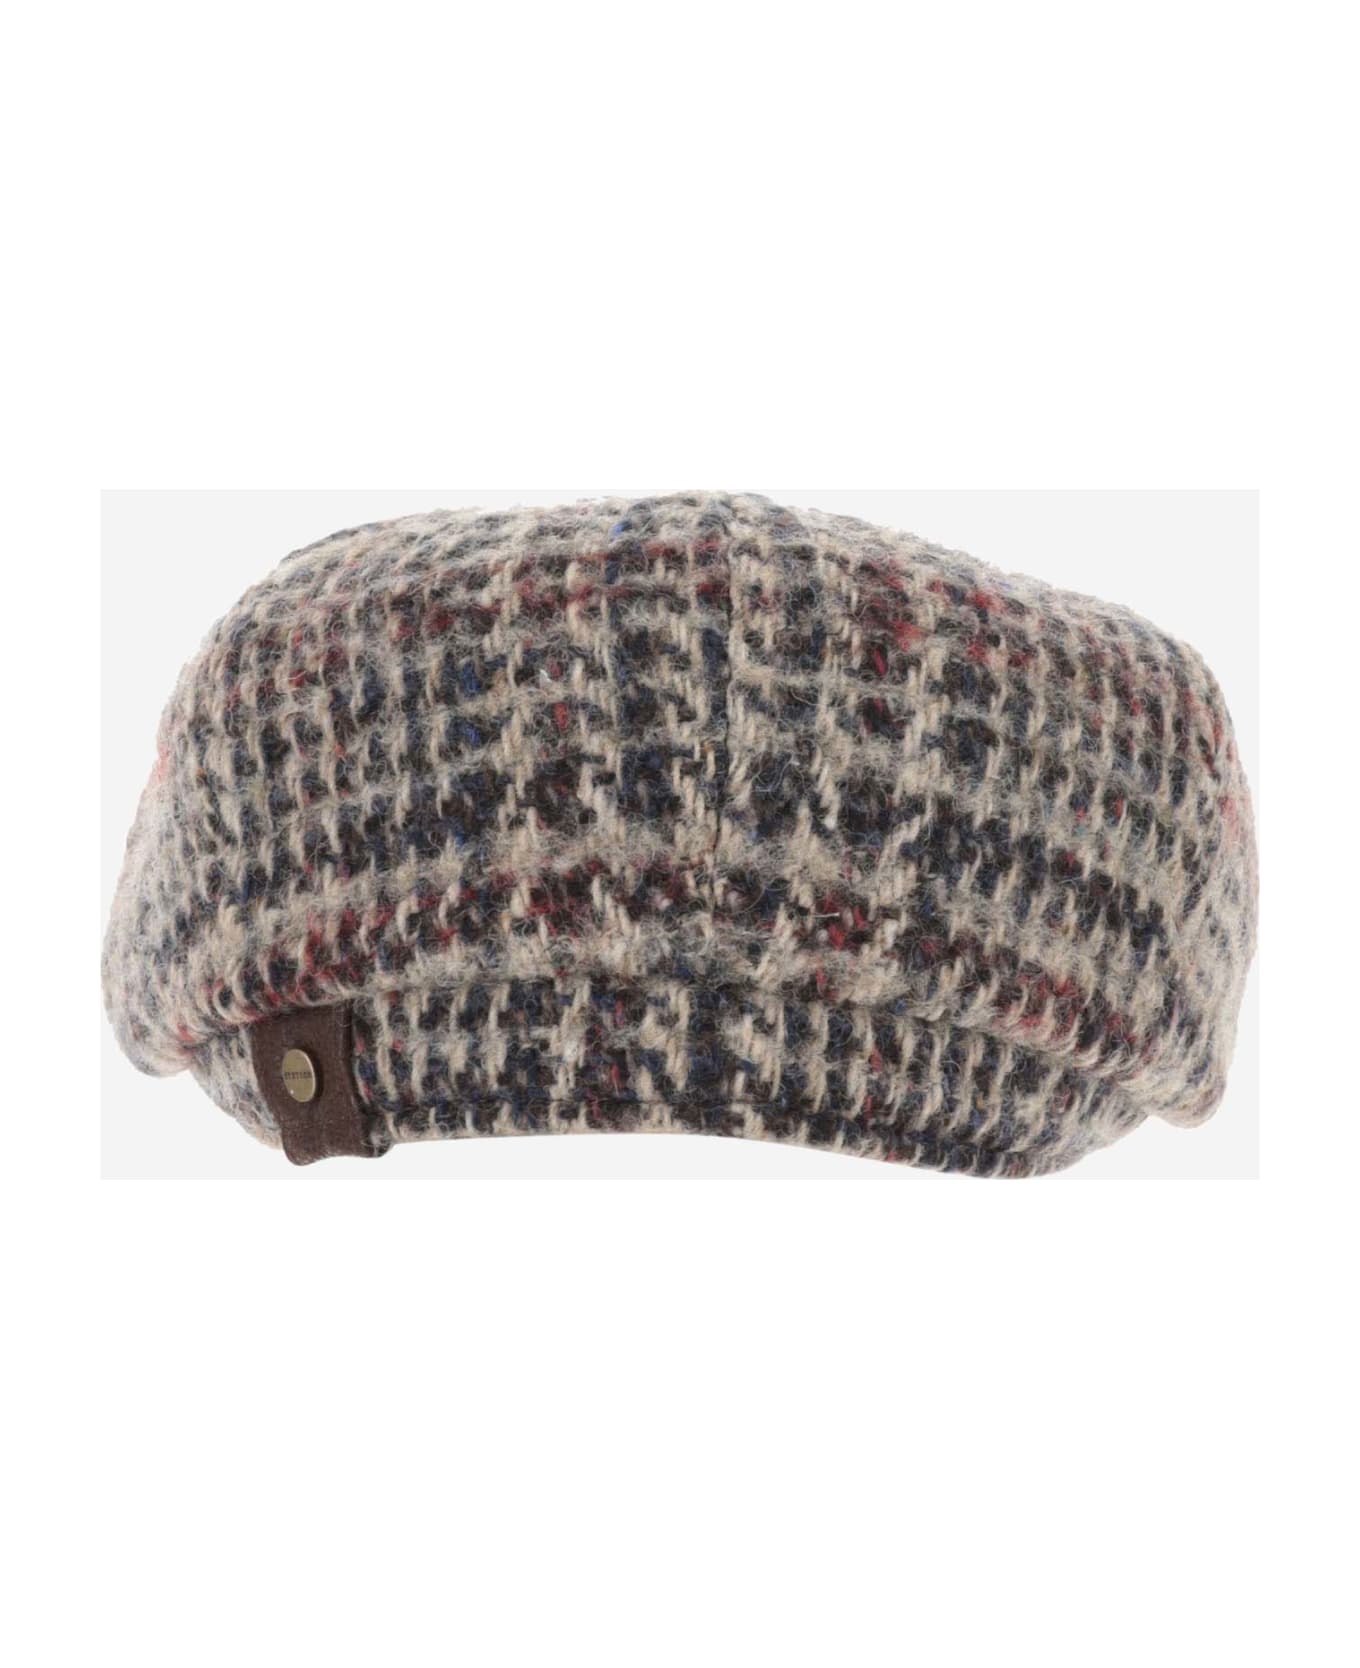 Stetson Wool Cap With Check Pattern - Red